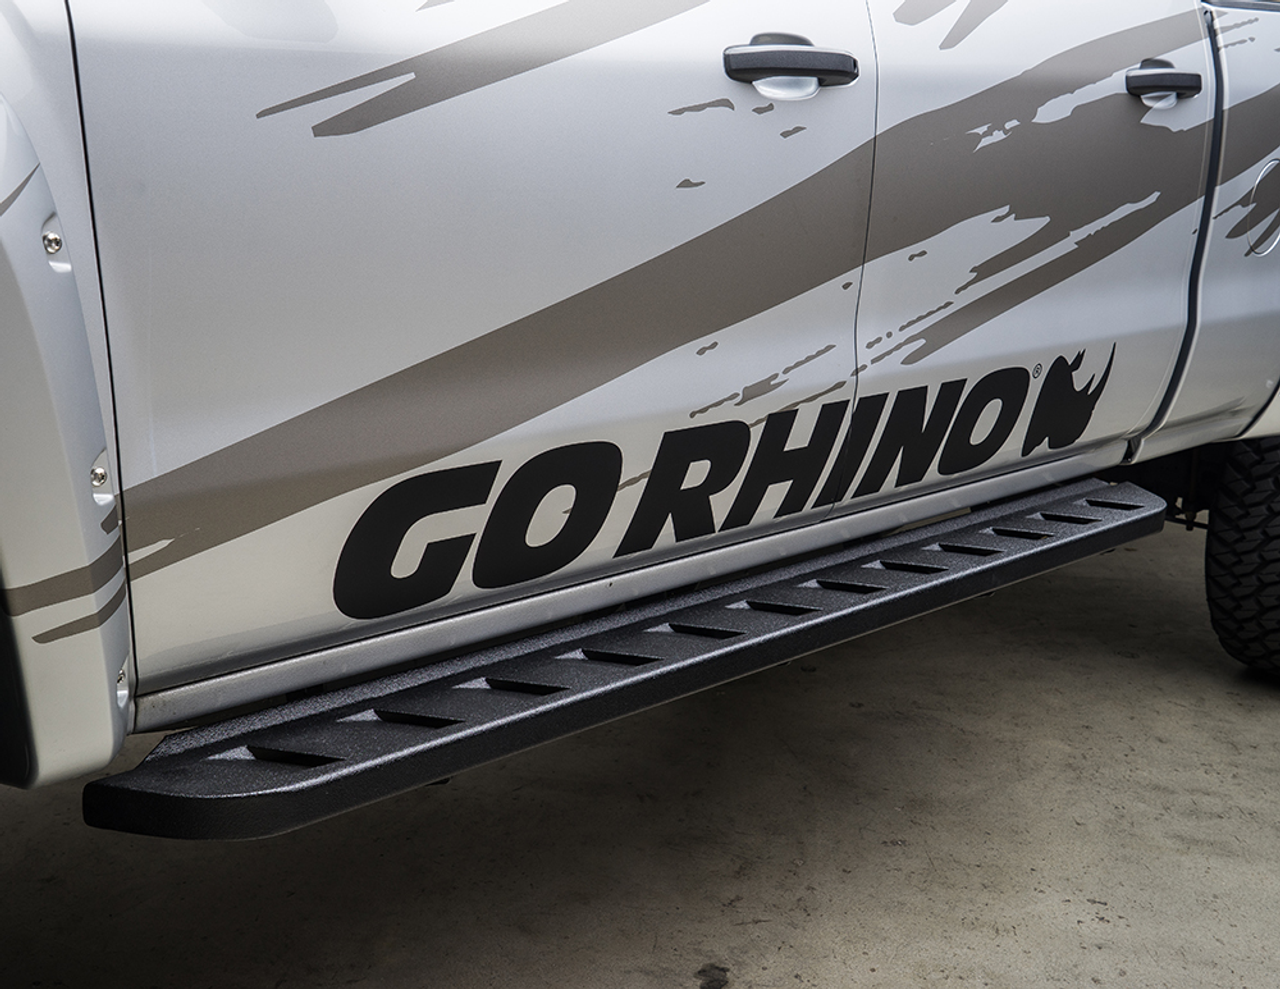 Go Rhino 63417780PC Ford, F-250, F-350, 2017 - 2021, RB10 Running boards - Complete Kit: RB10 Running boards + Brackets, Galvanized Steel, Textured black, 630080PC RB10 + 6941555 RB Brackets